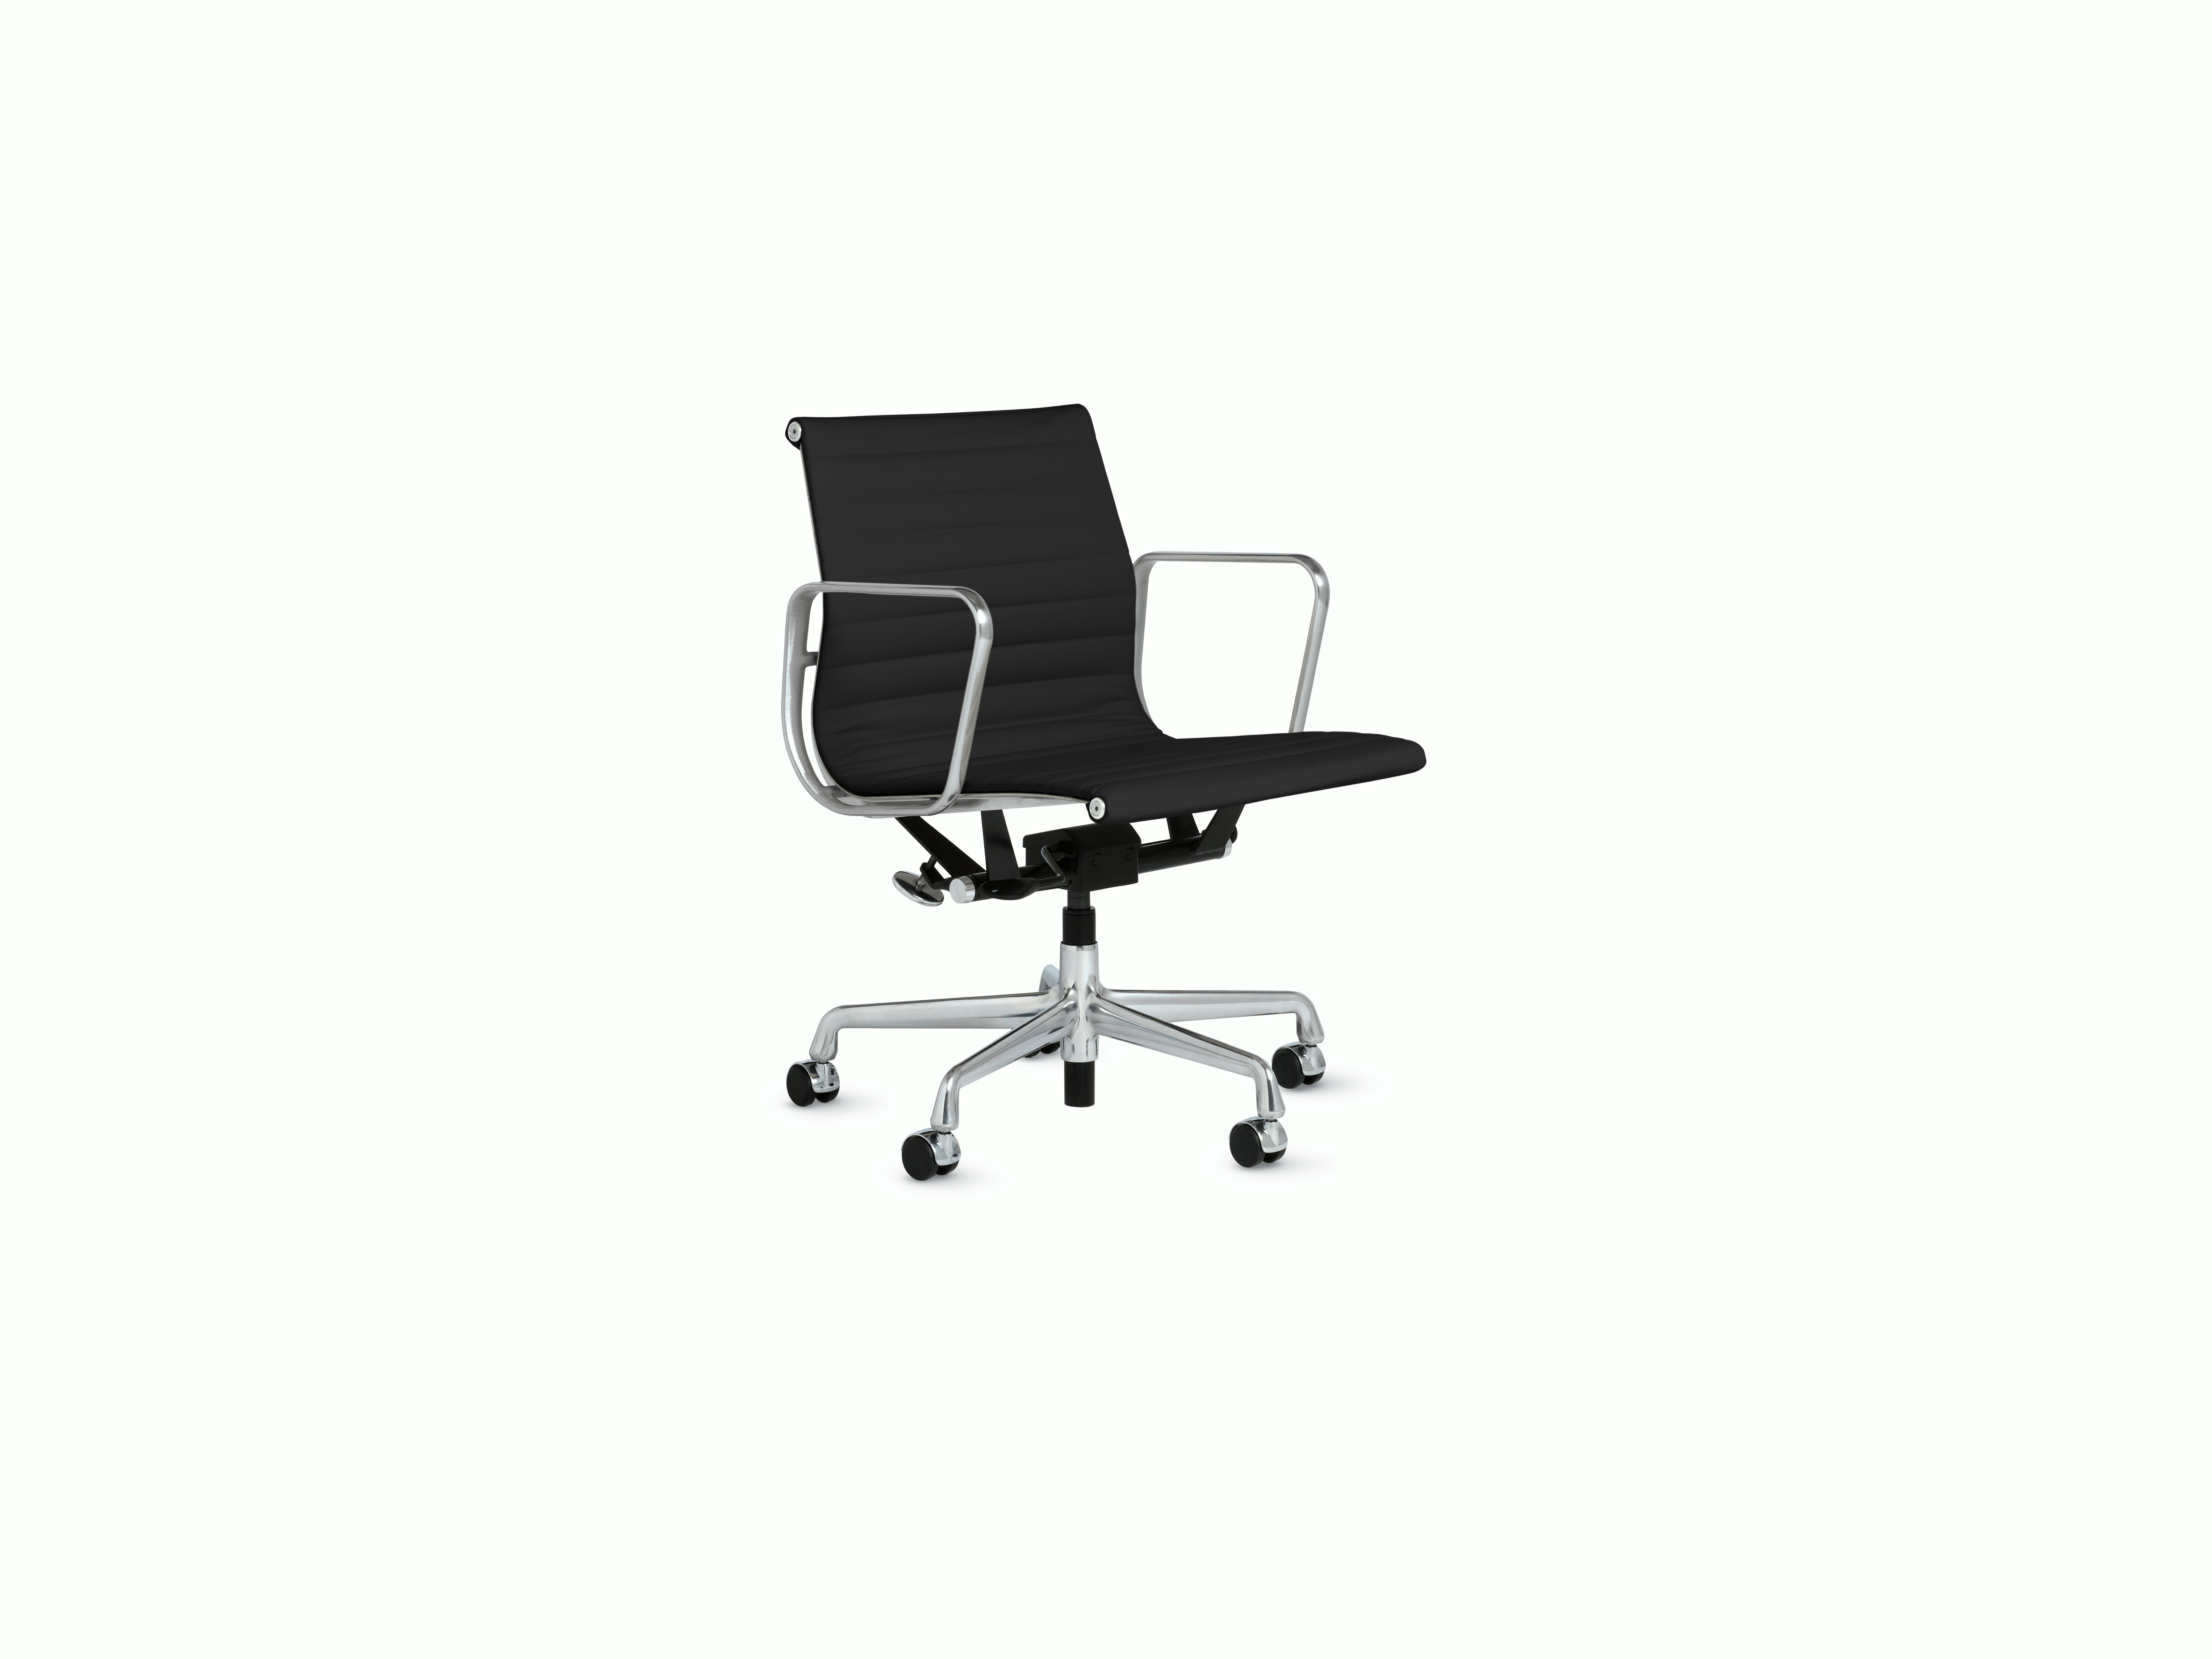 Herman Miller Eames Soft Pad Executive Chair with Pneumatic Lift - Black  Frame - Available at Grounded